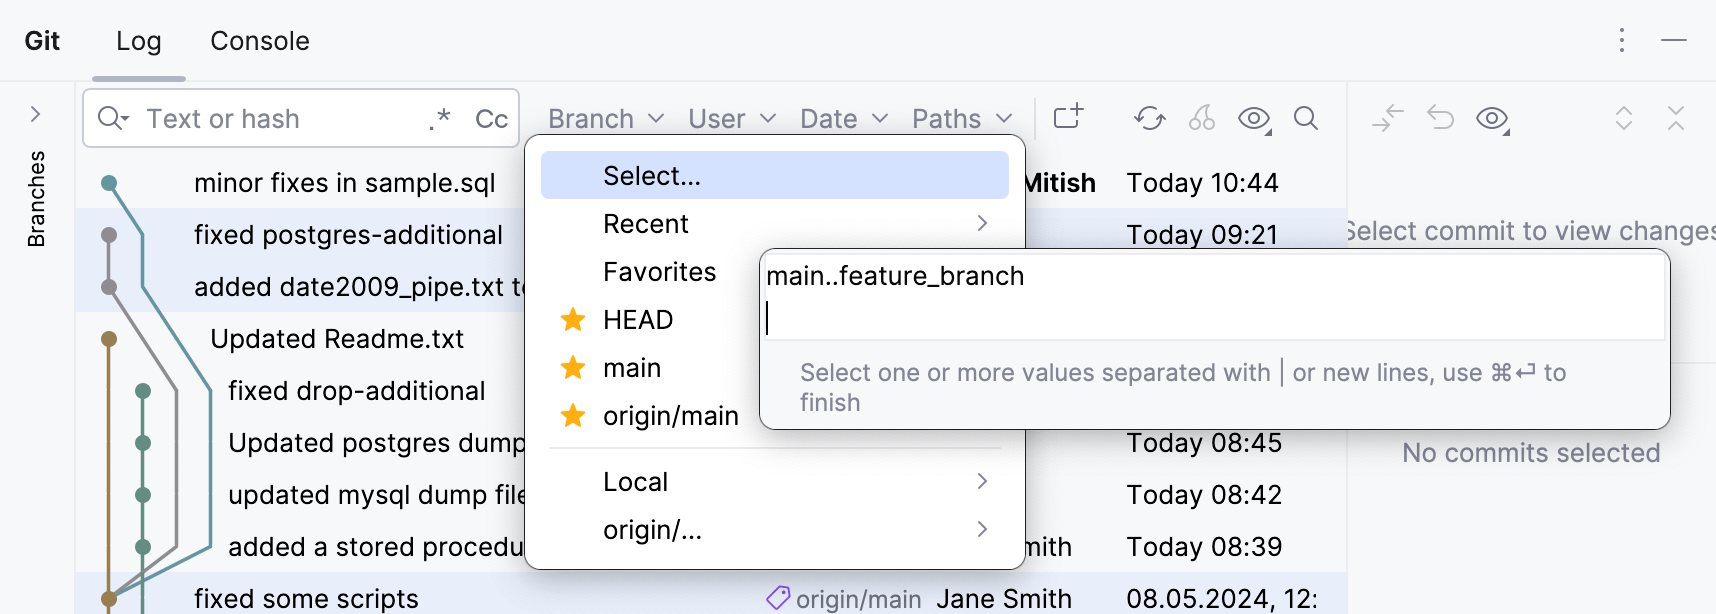 Context menu for Branch filter in Commits pane